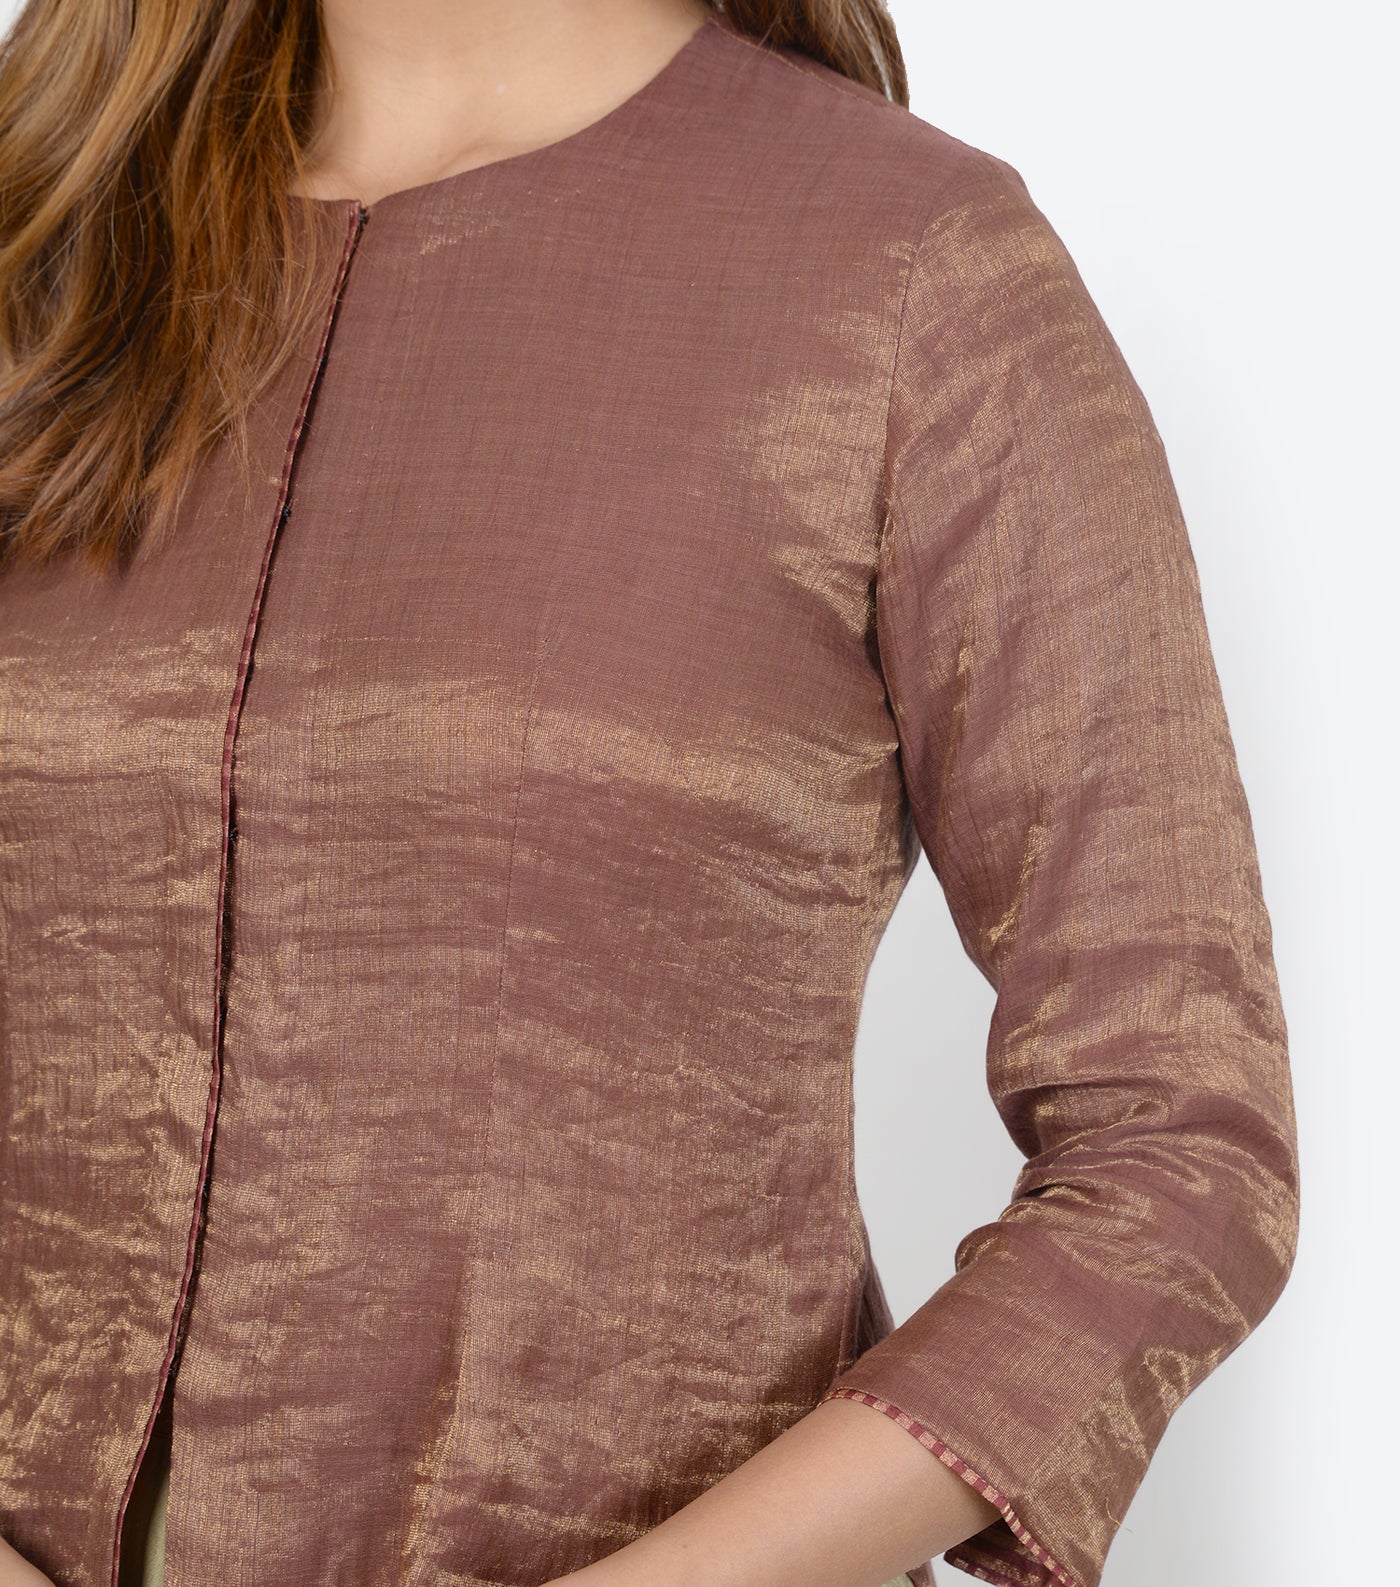 Maroon solid tissue blouse